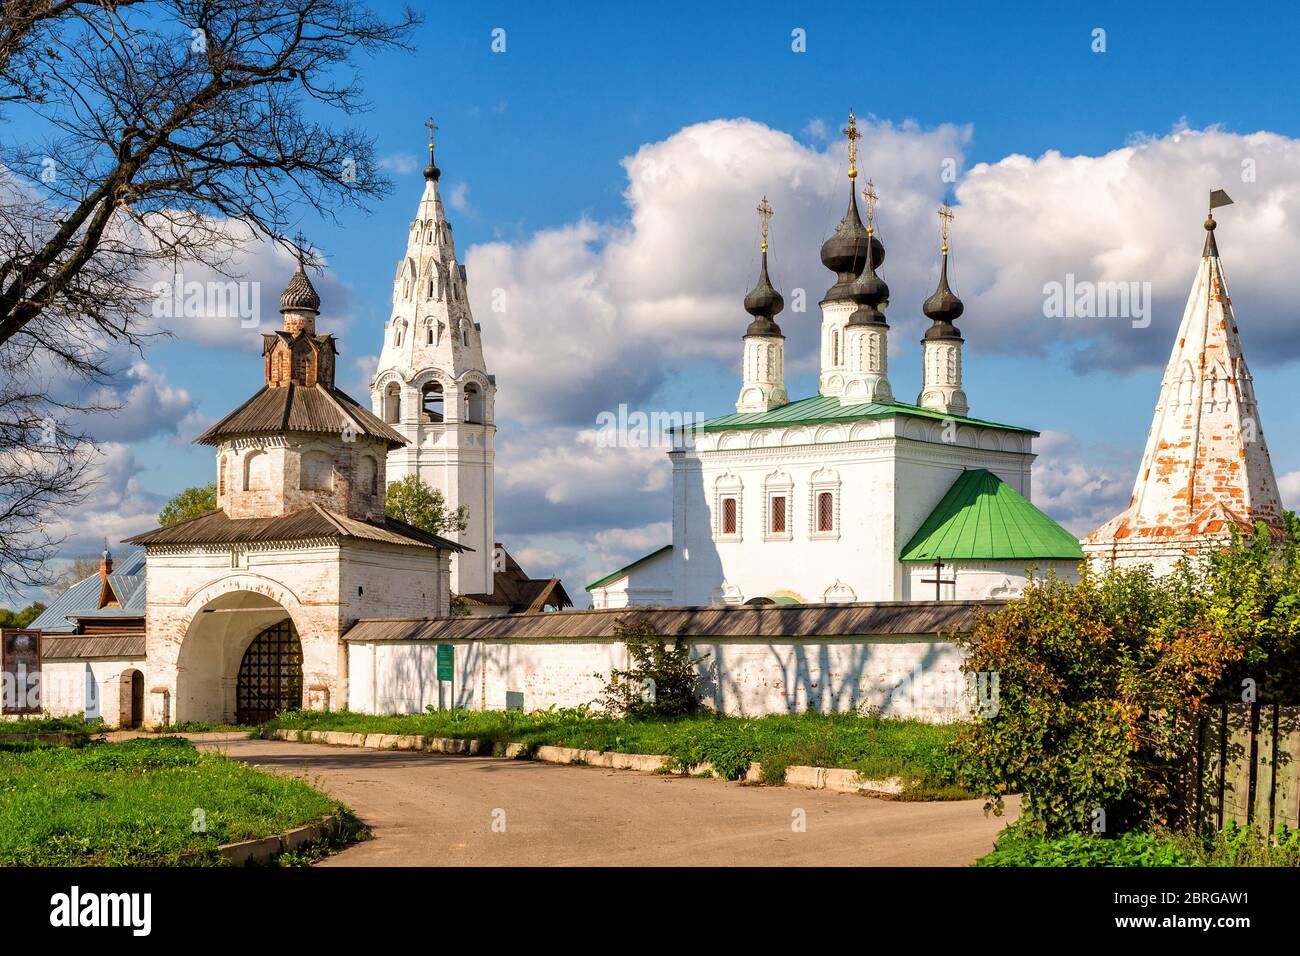 Alexandrovsky monastery in Suzdal, Golden Ring of Russia Stock Photo